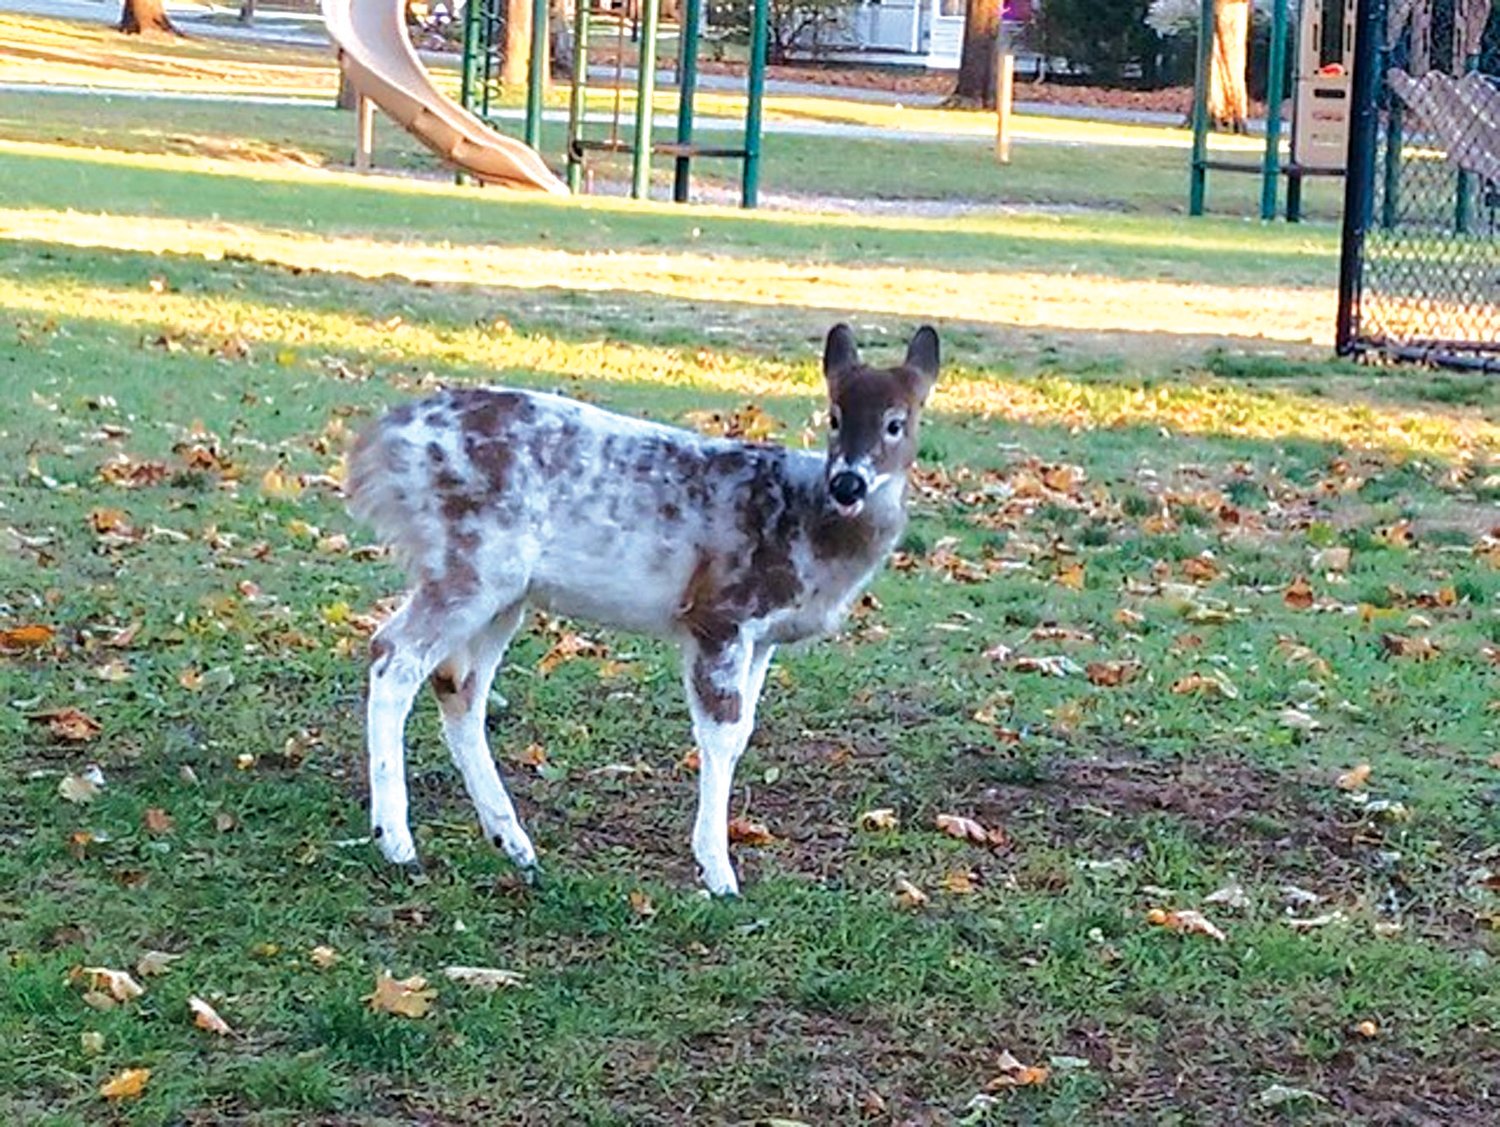 PIEBALDS: This little piebald deer, a relative genetic rarity, lives with his spotted family near Warwick City Park. City resident and wildlife enthusiast Art Dunn has been photographing members of the family, but unable to catch them all together in a single frame.